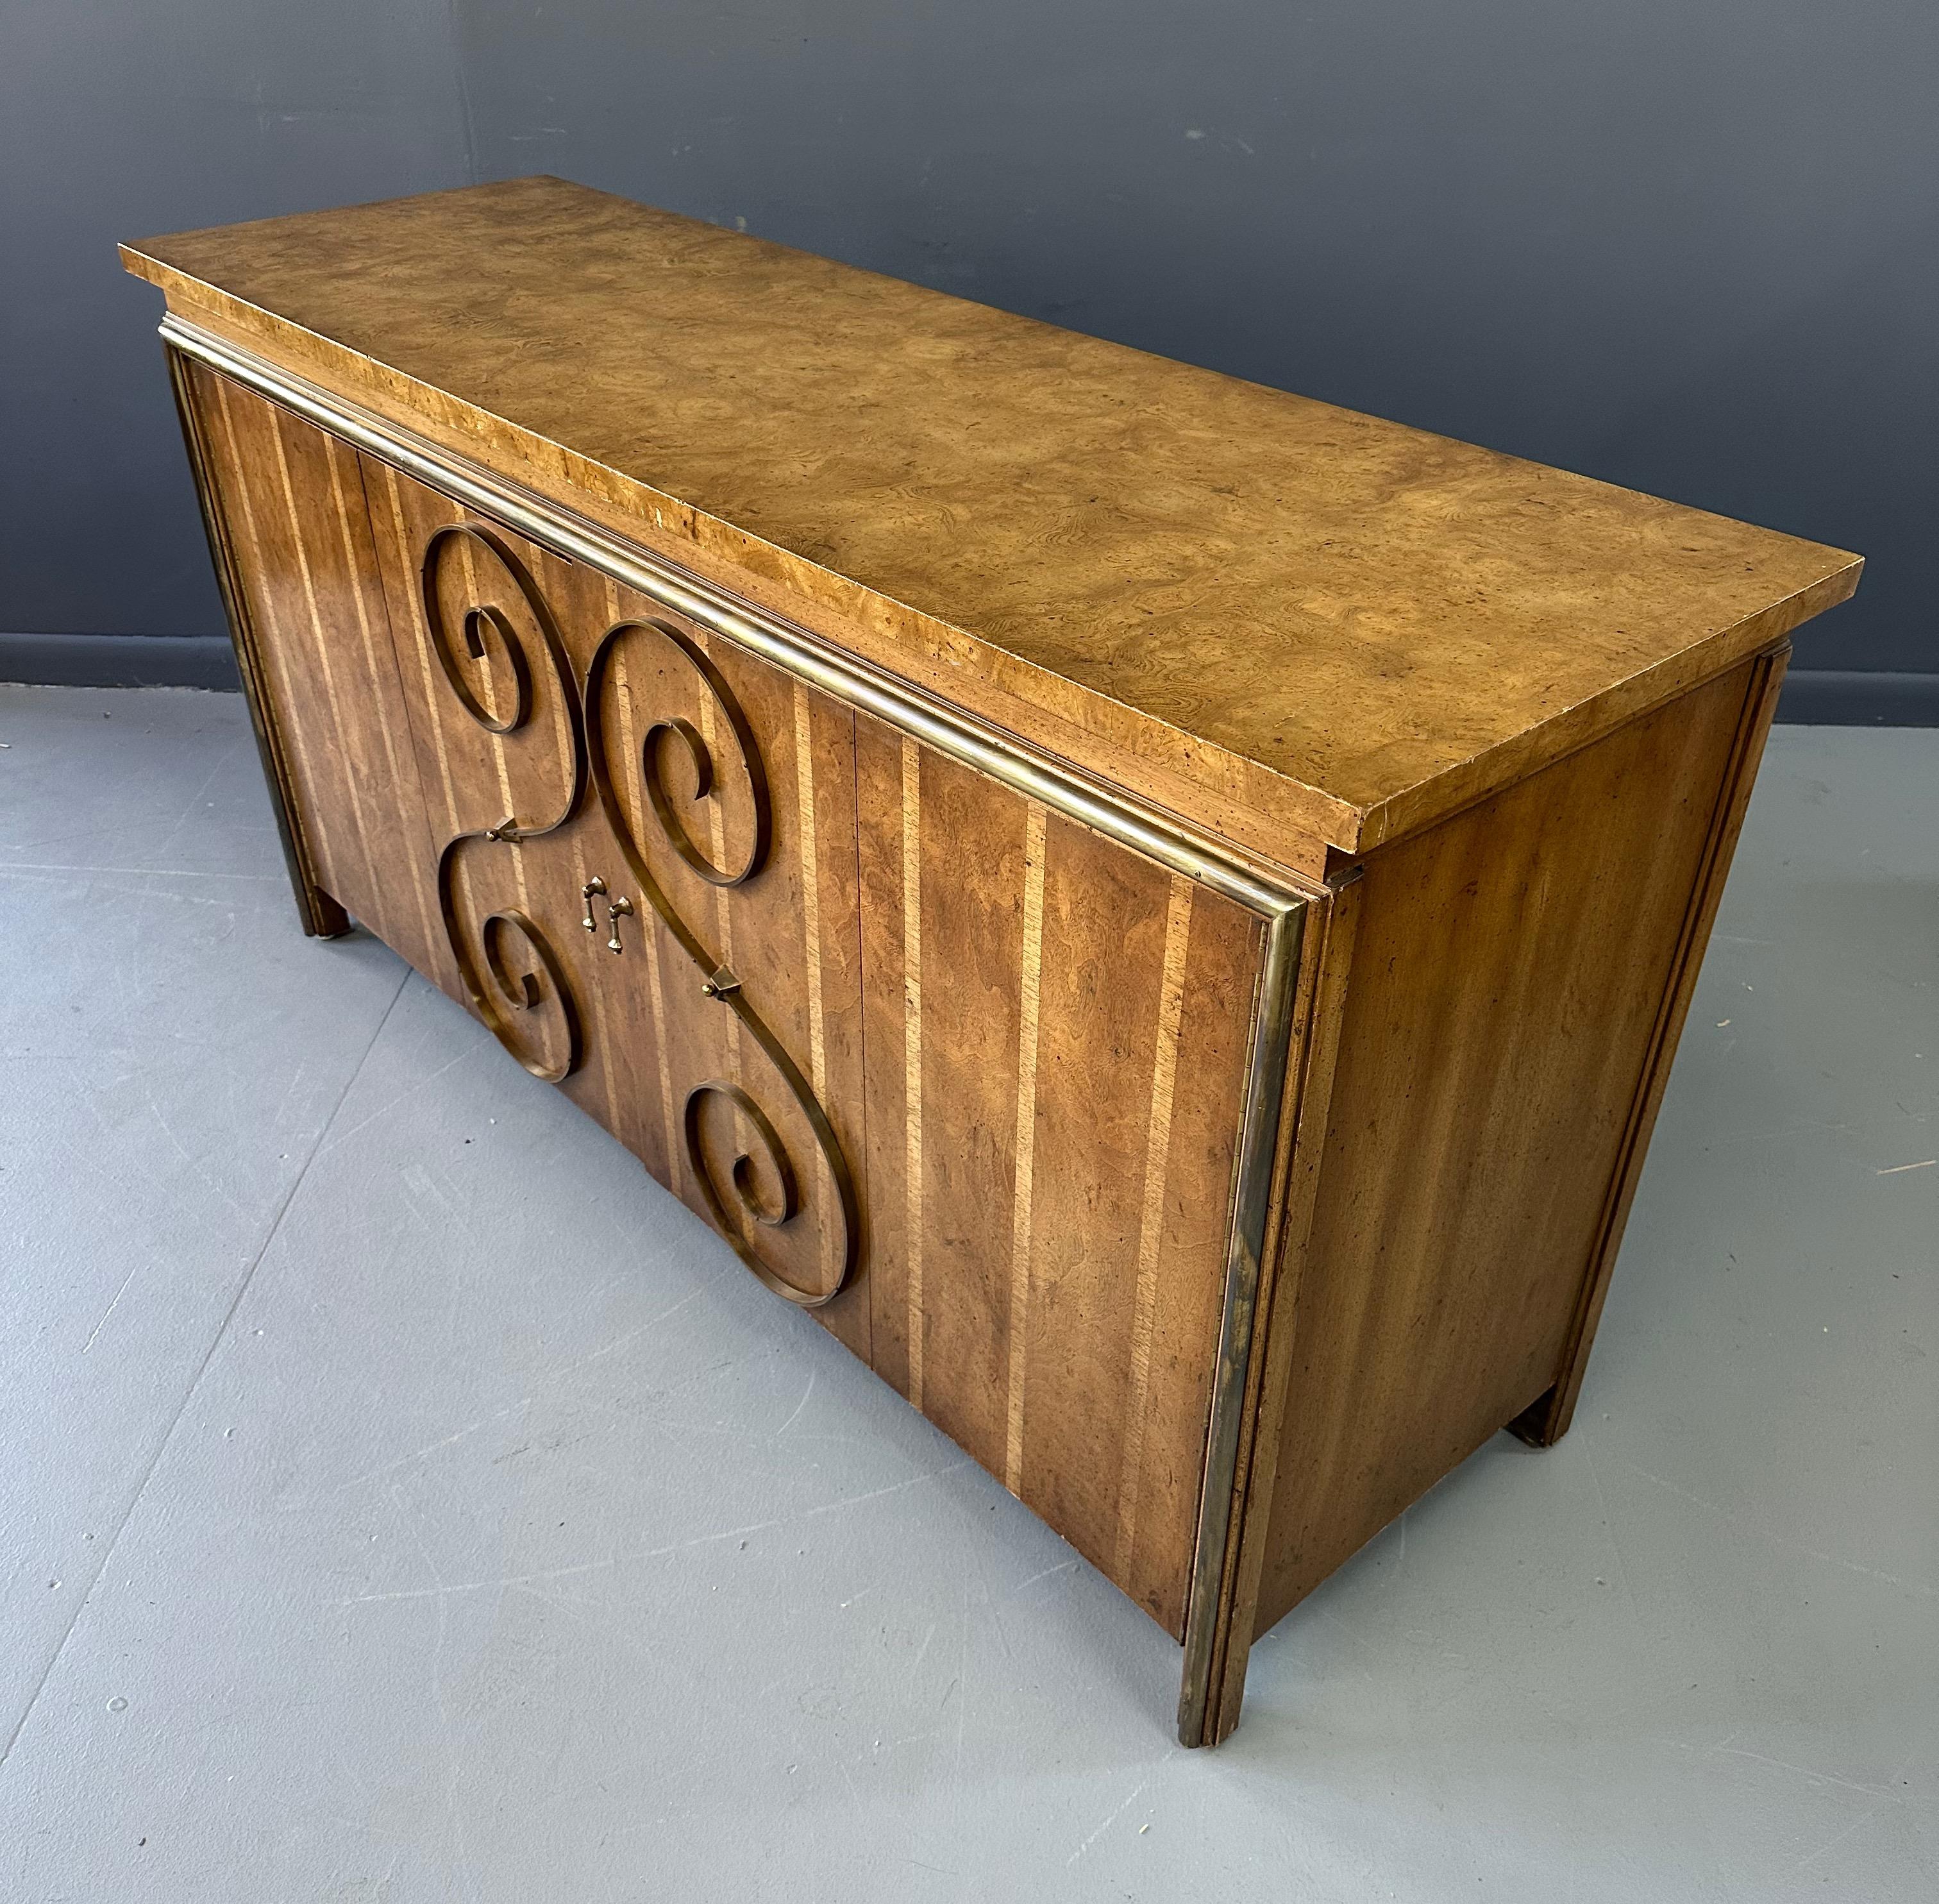 1950s Neoclassical Revival Sideboard in Pecan and Burl with Brass Scroll Details For Sale 1